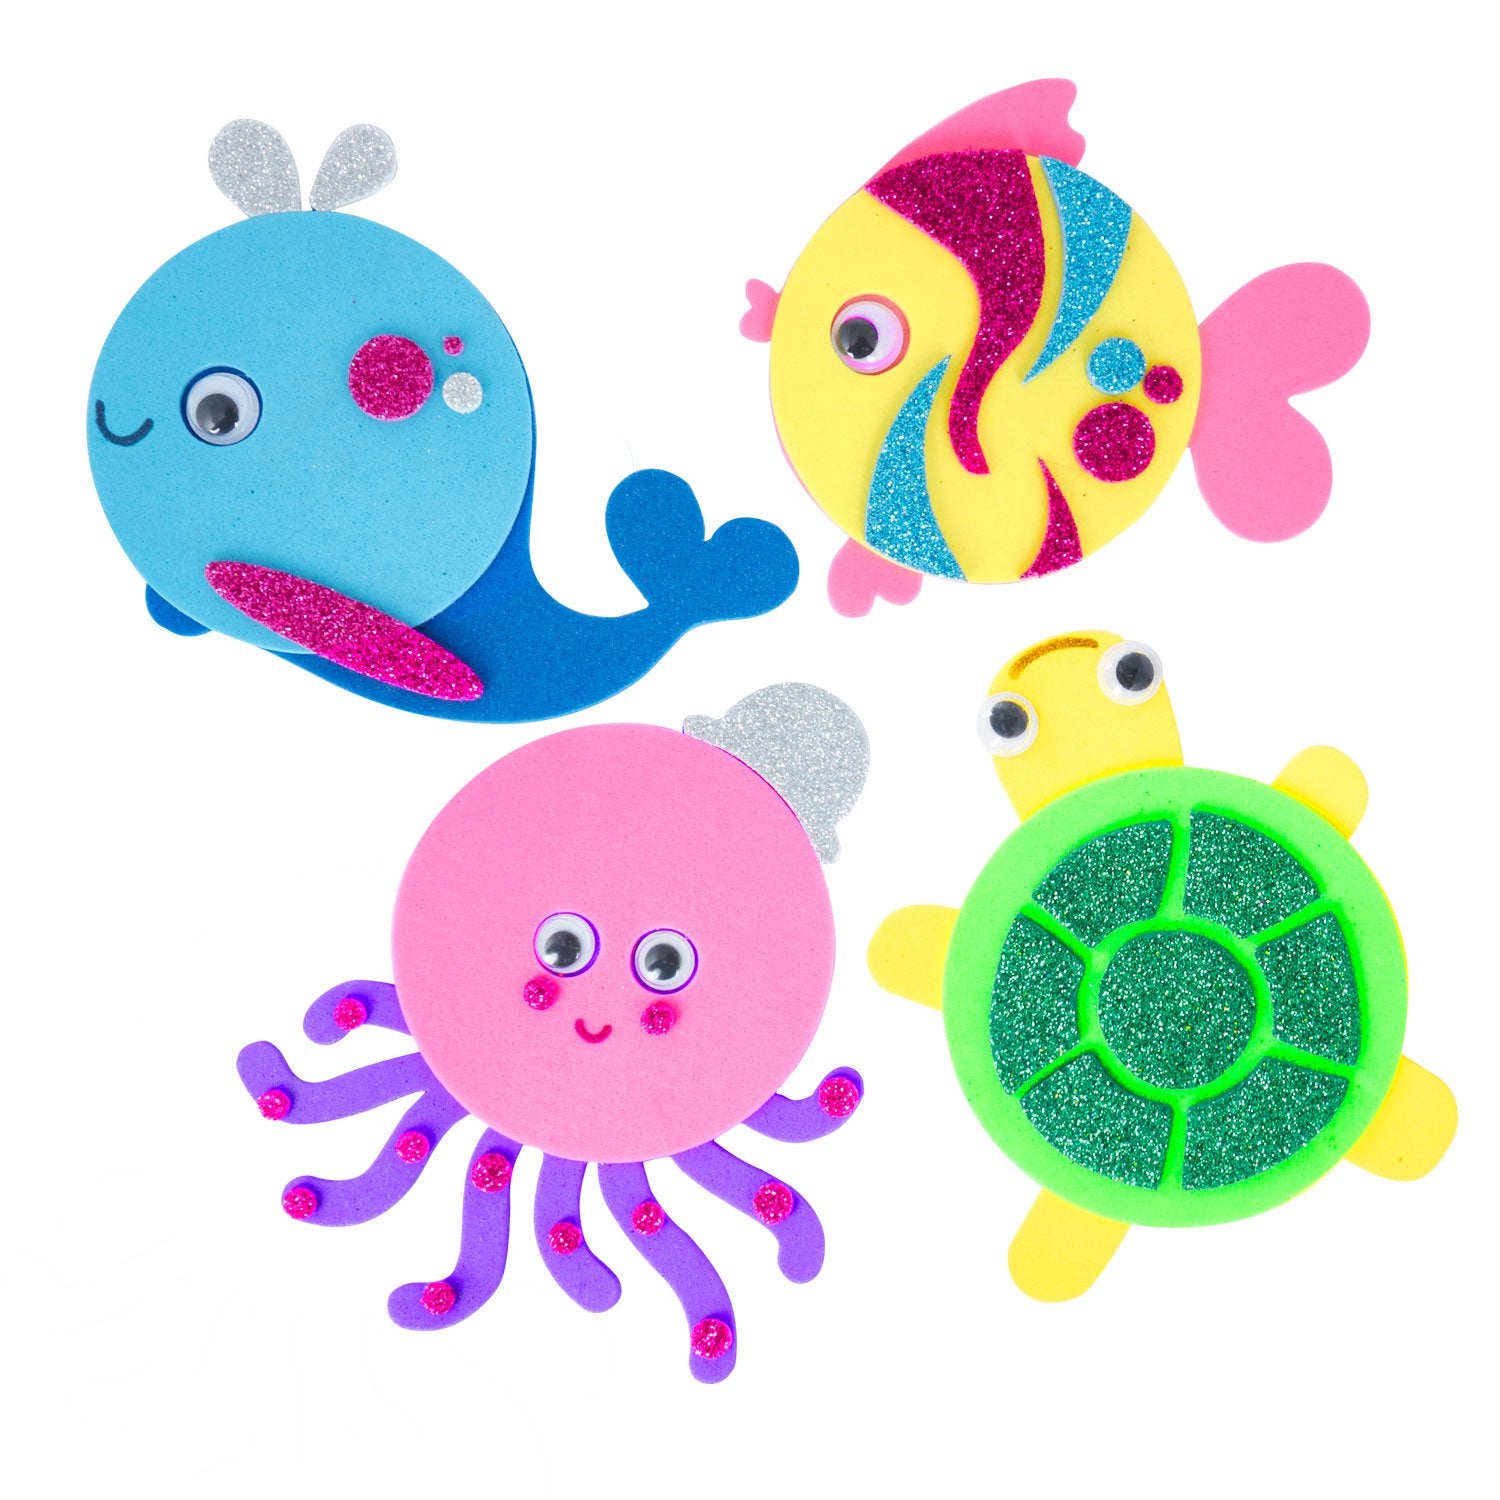 Craft Kit: 6-in-1 Under The Sea